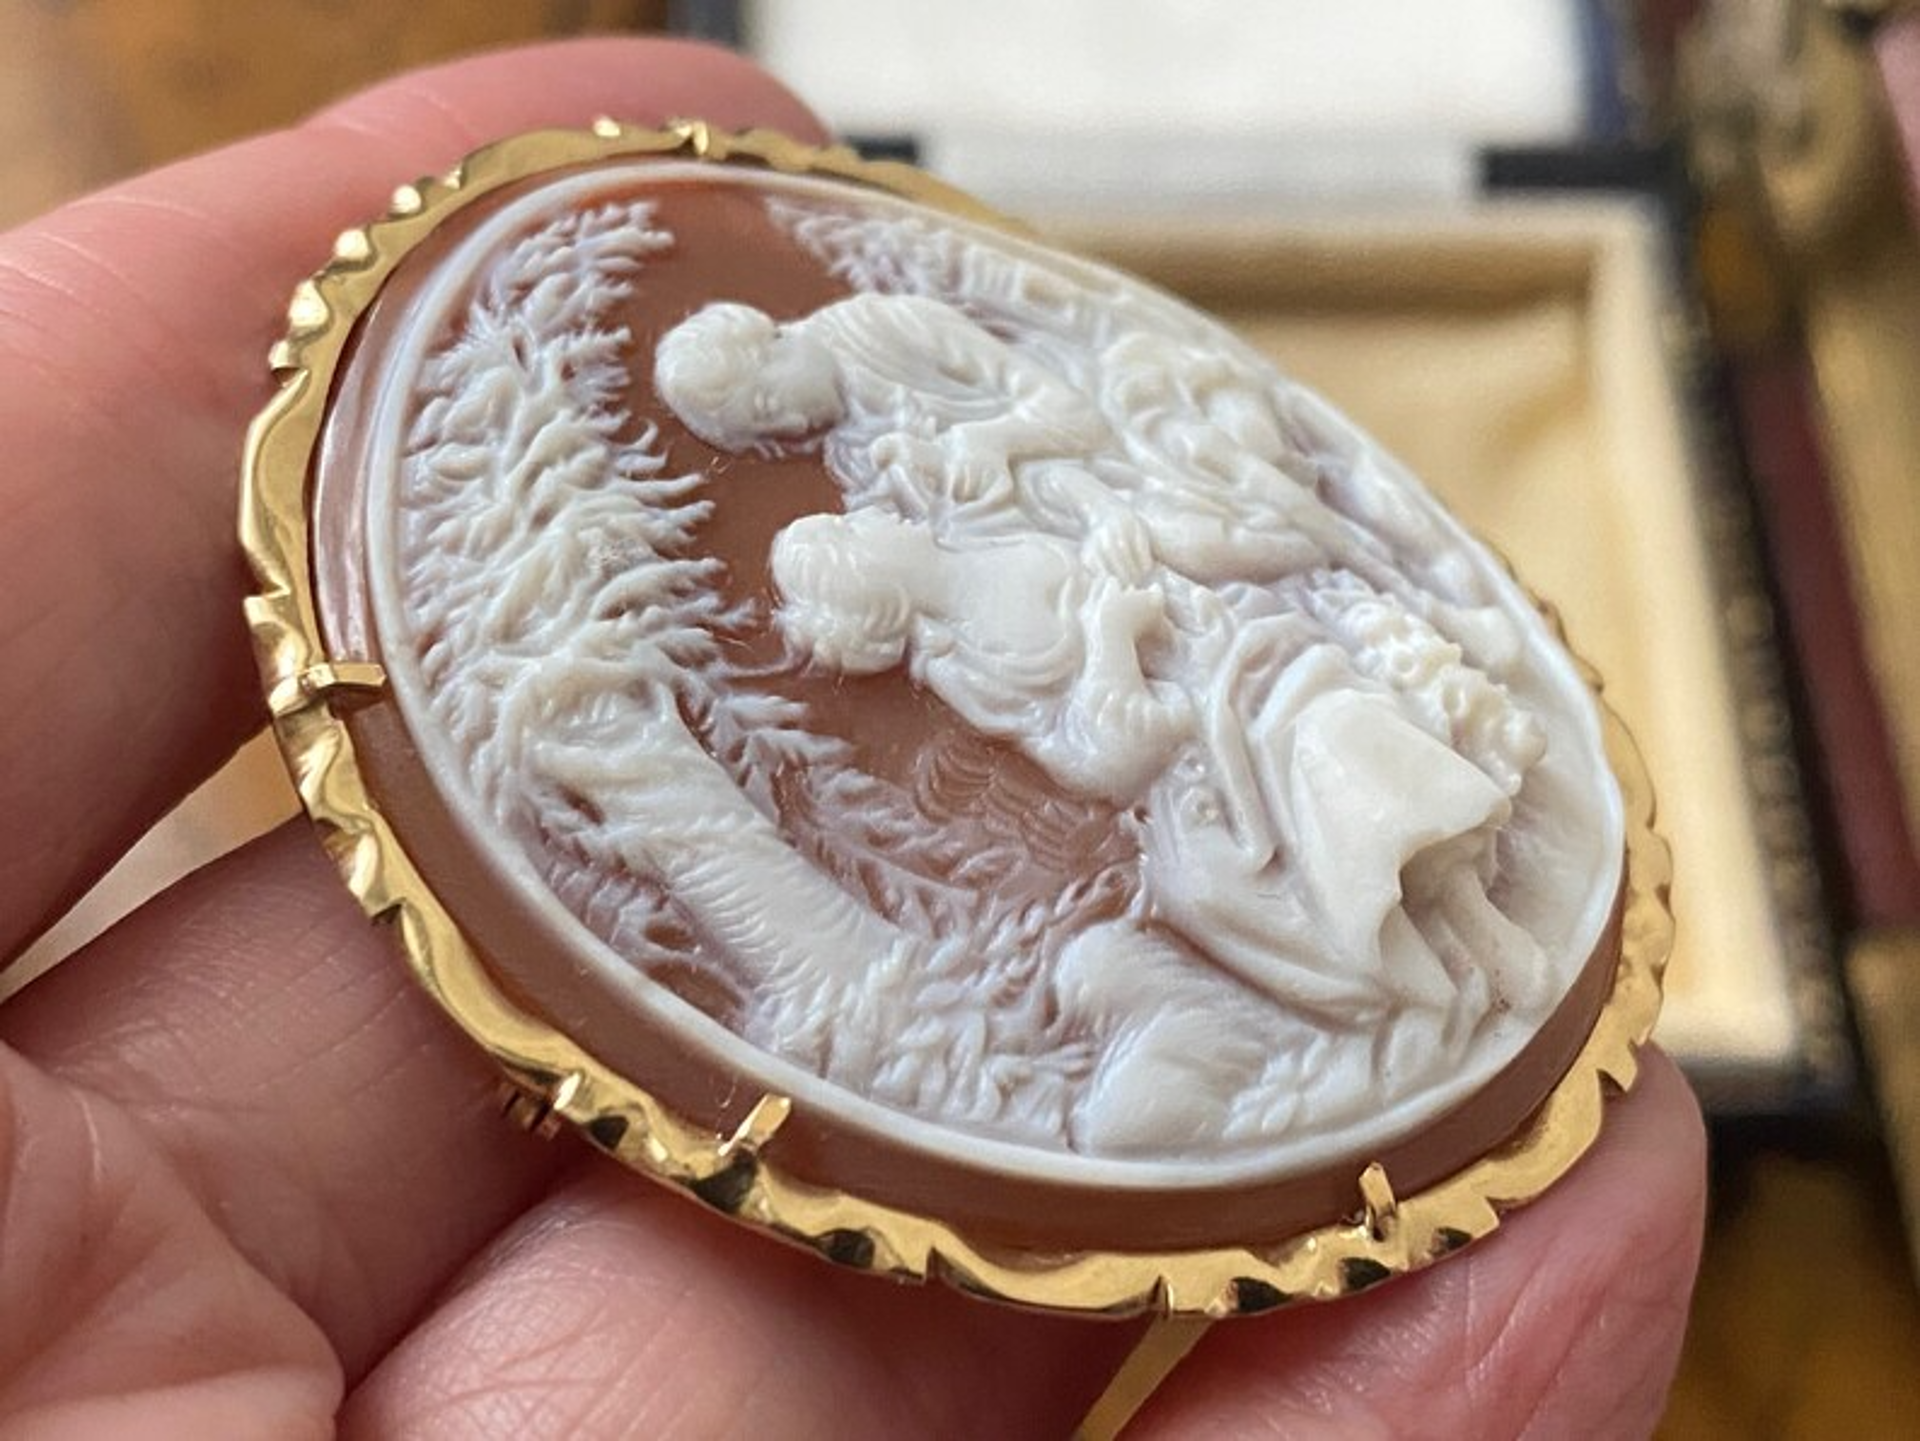 Sweetheart courting scene carved Italian shell cameo necklace pendant combined brooch/pin, 14ct gold, signed by Cameo